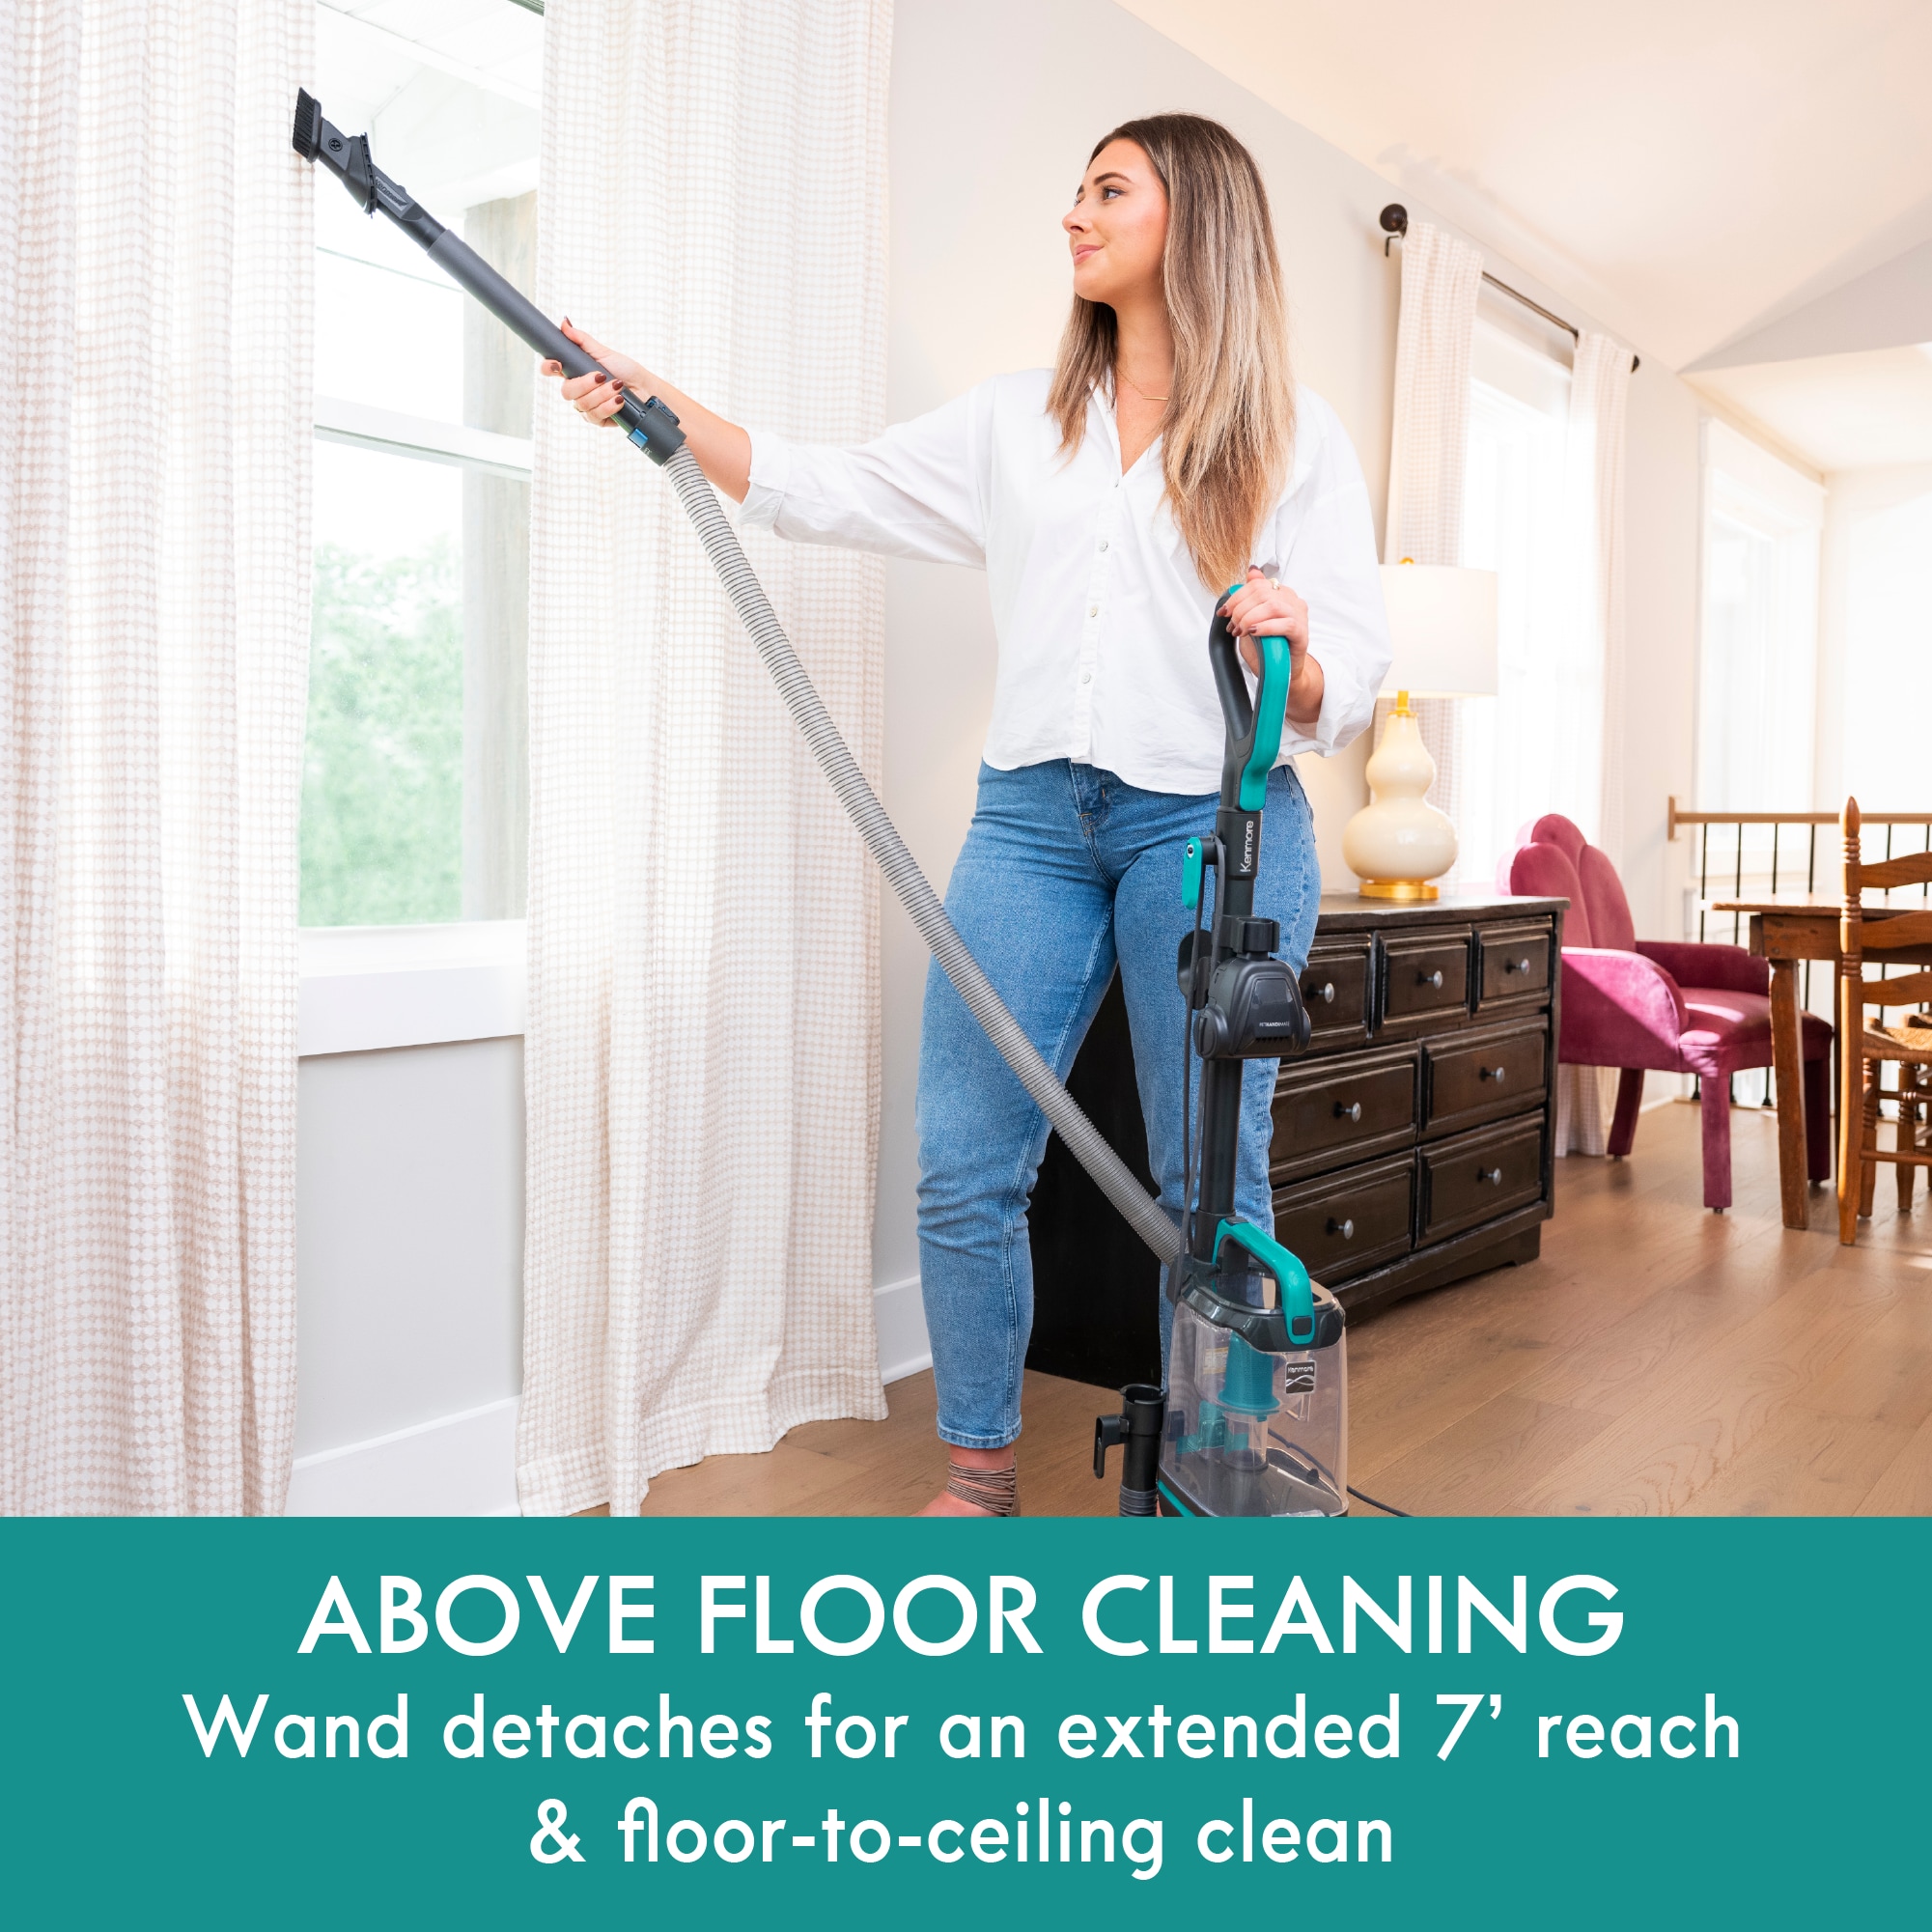 Tineco FLOOR ONE S7 PRO smart wet & dry vacuum cleaner rinses, washes,  wrings & cleans » Gadget Flow